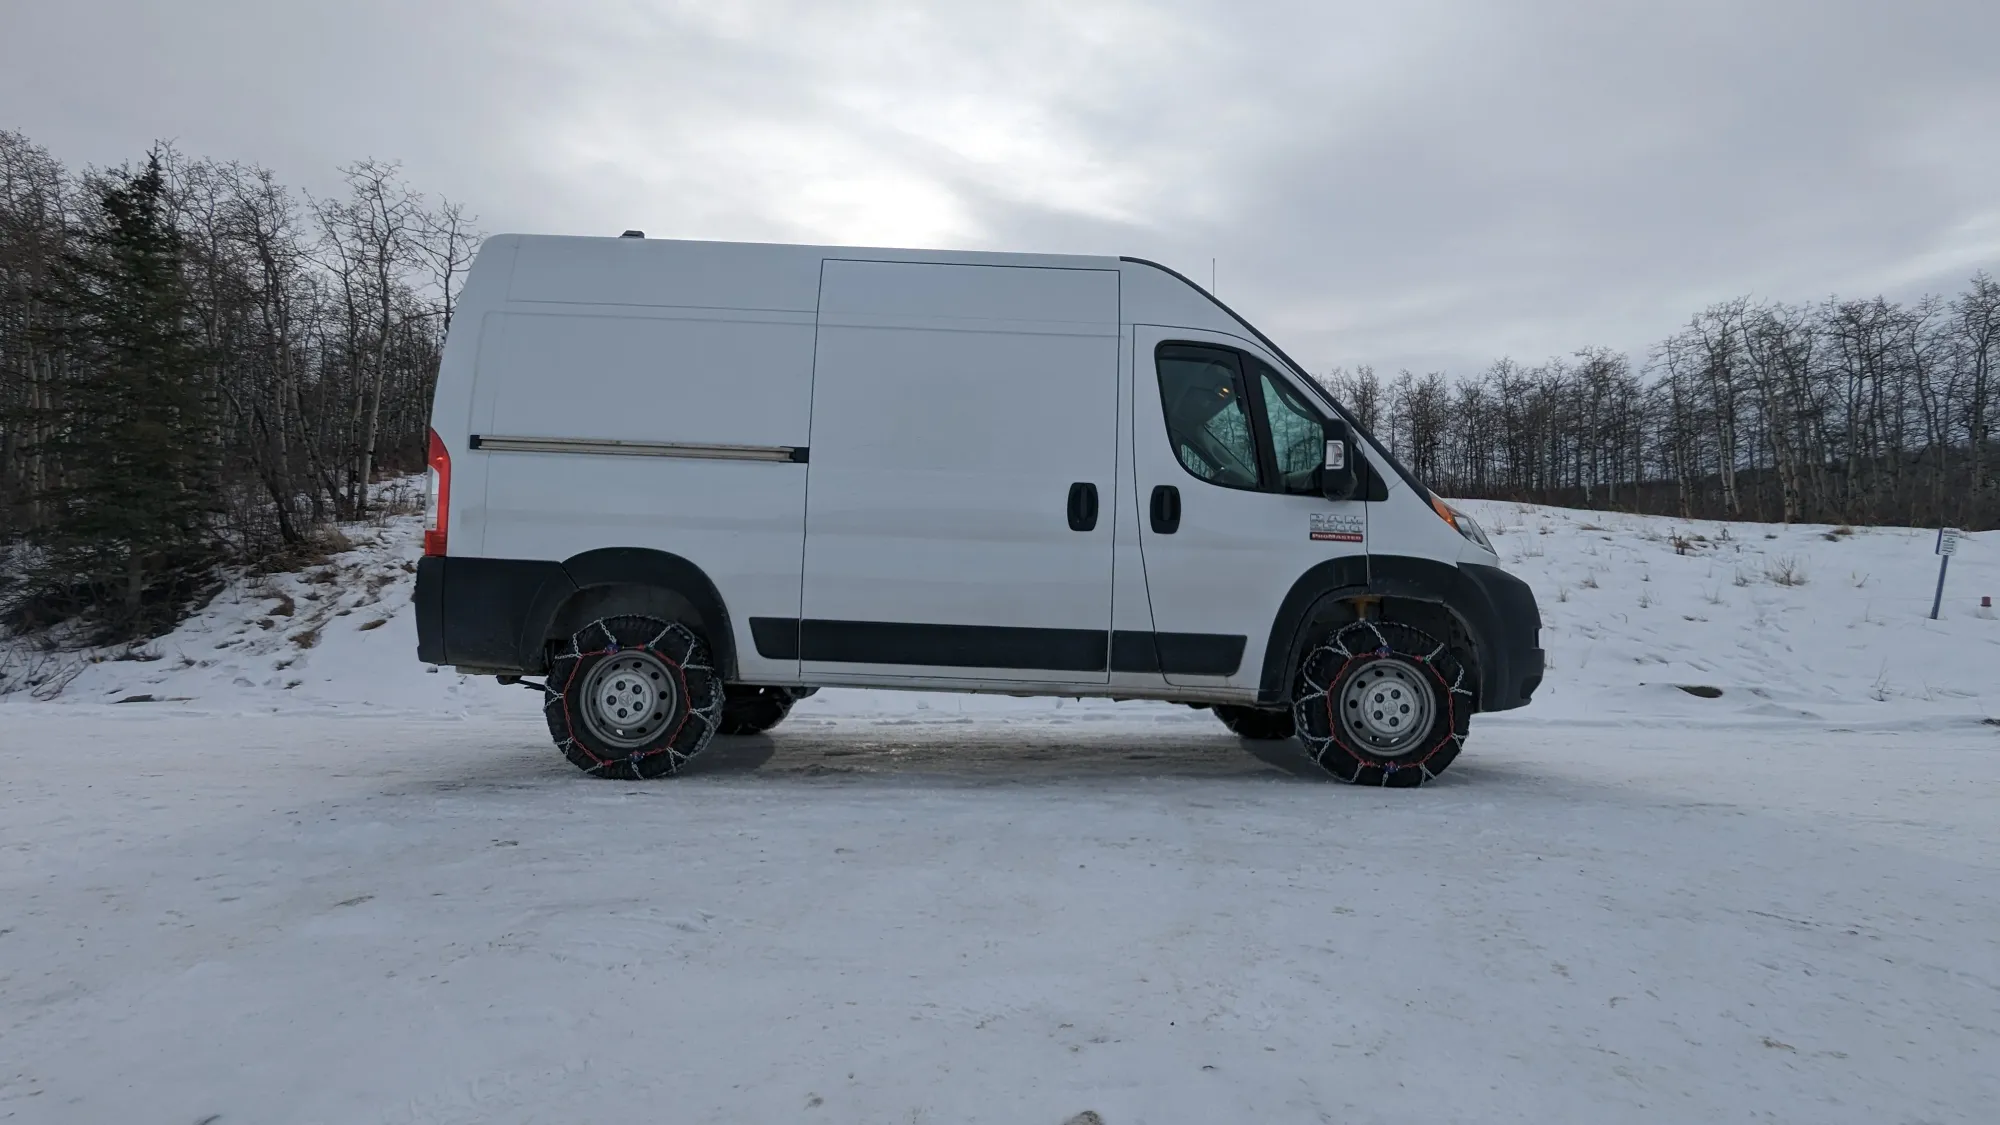 Van with tire chains - testing before heading out